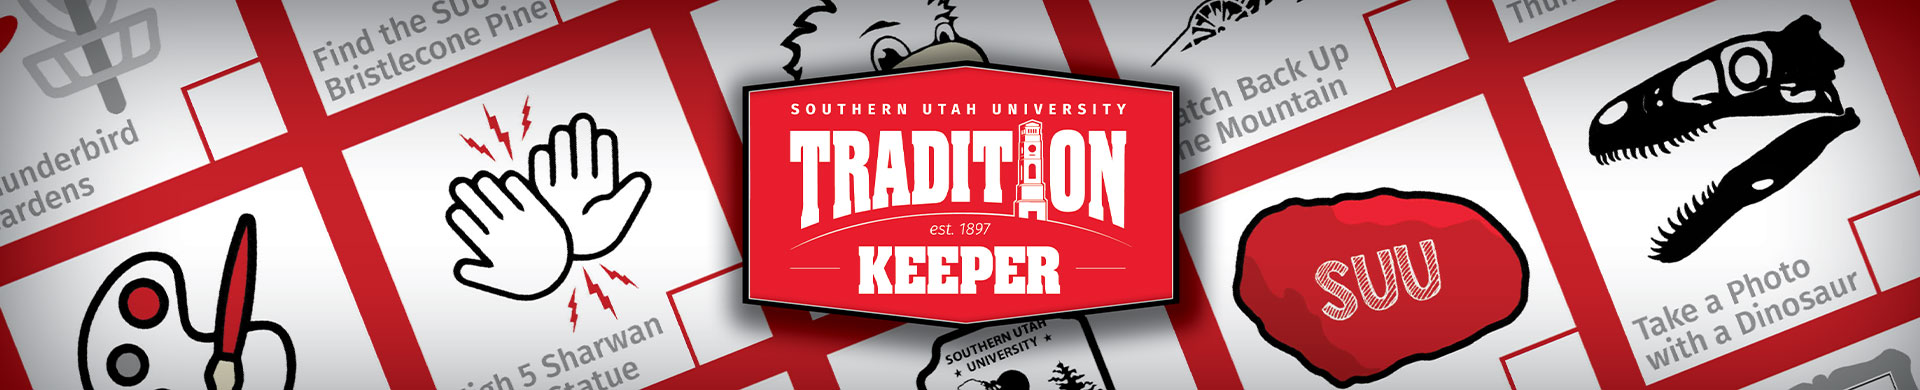 Tradition Keeper Banner